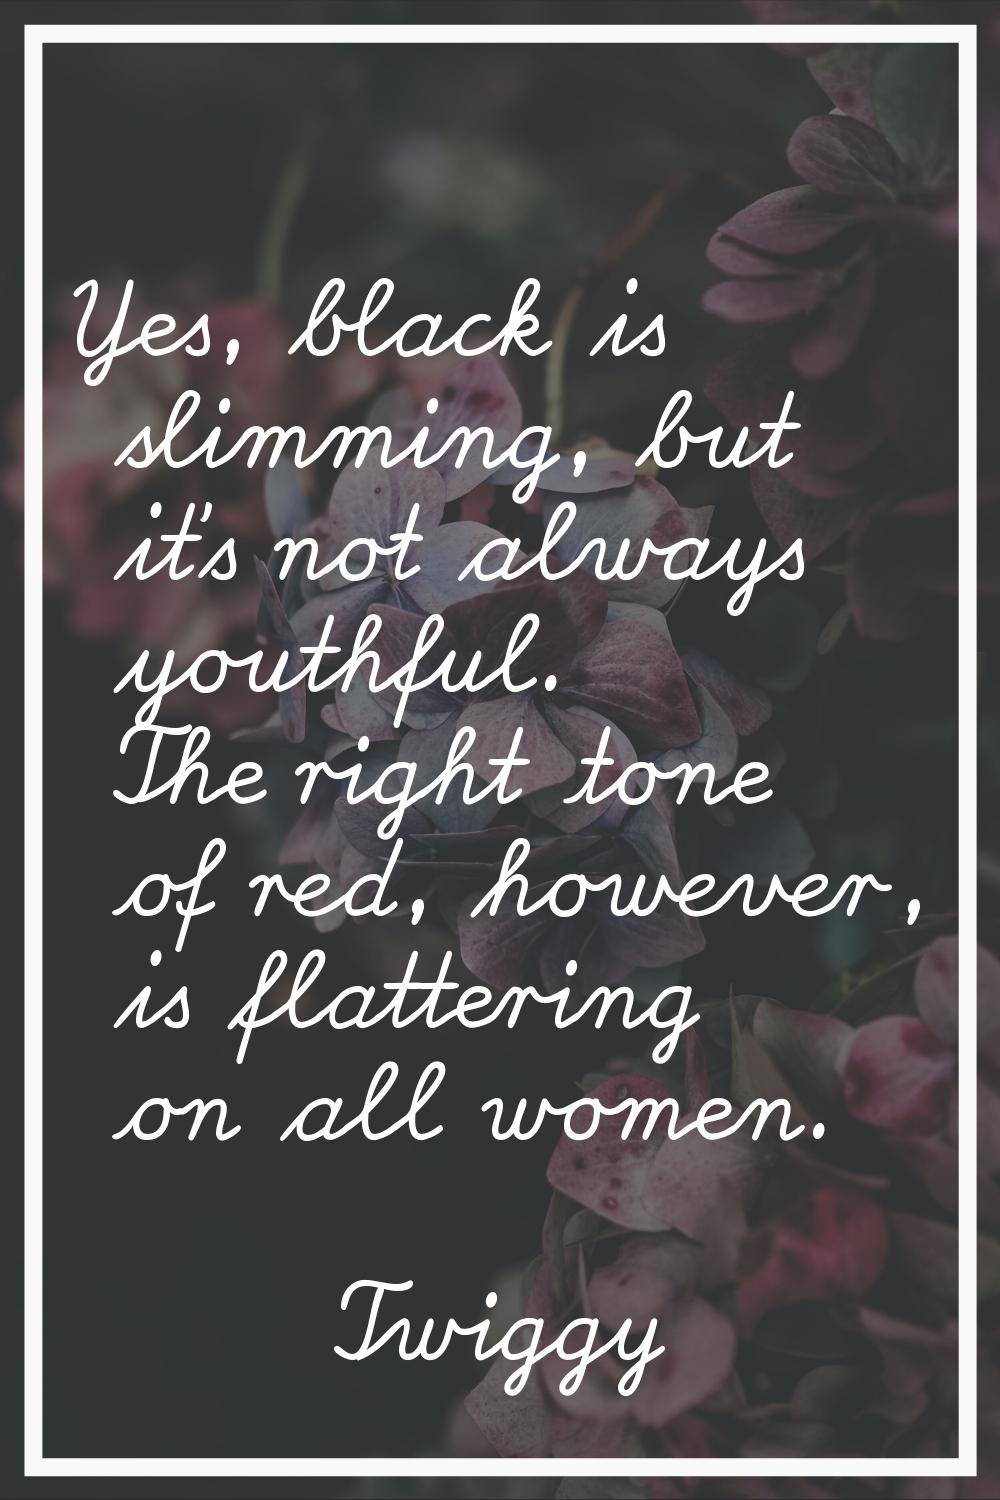 Yes, black is slimming, but it's not always youthful. The right tone of red, however, is flattering